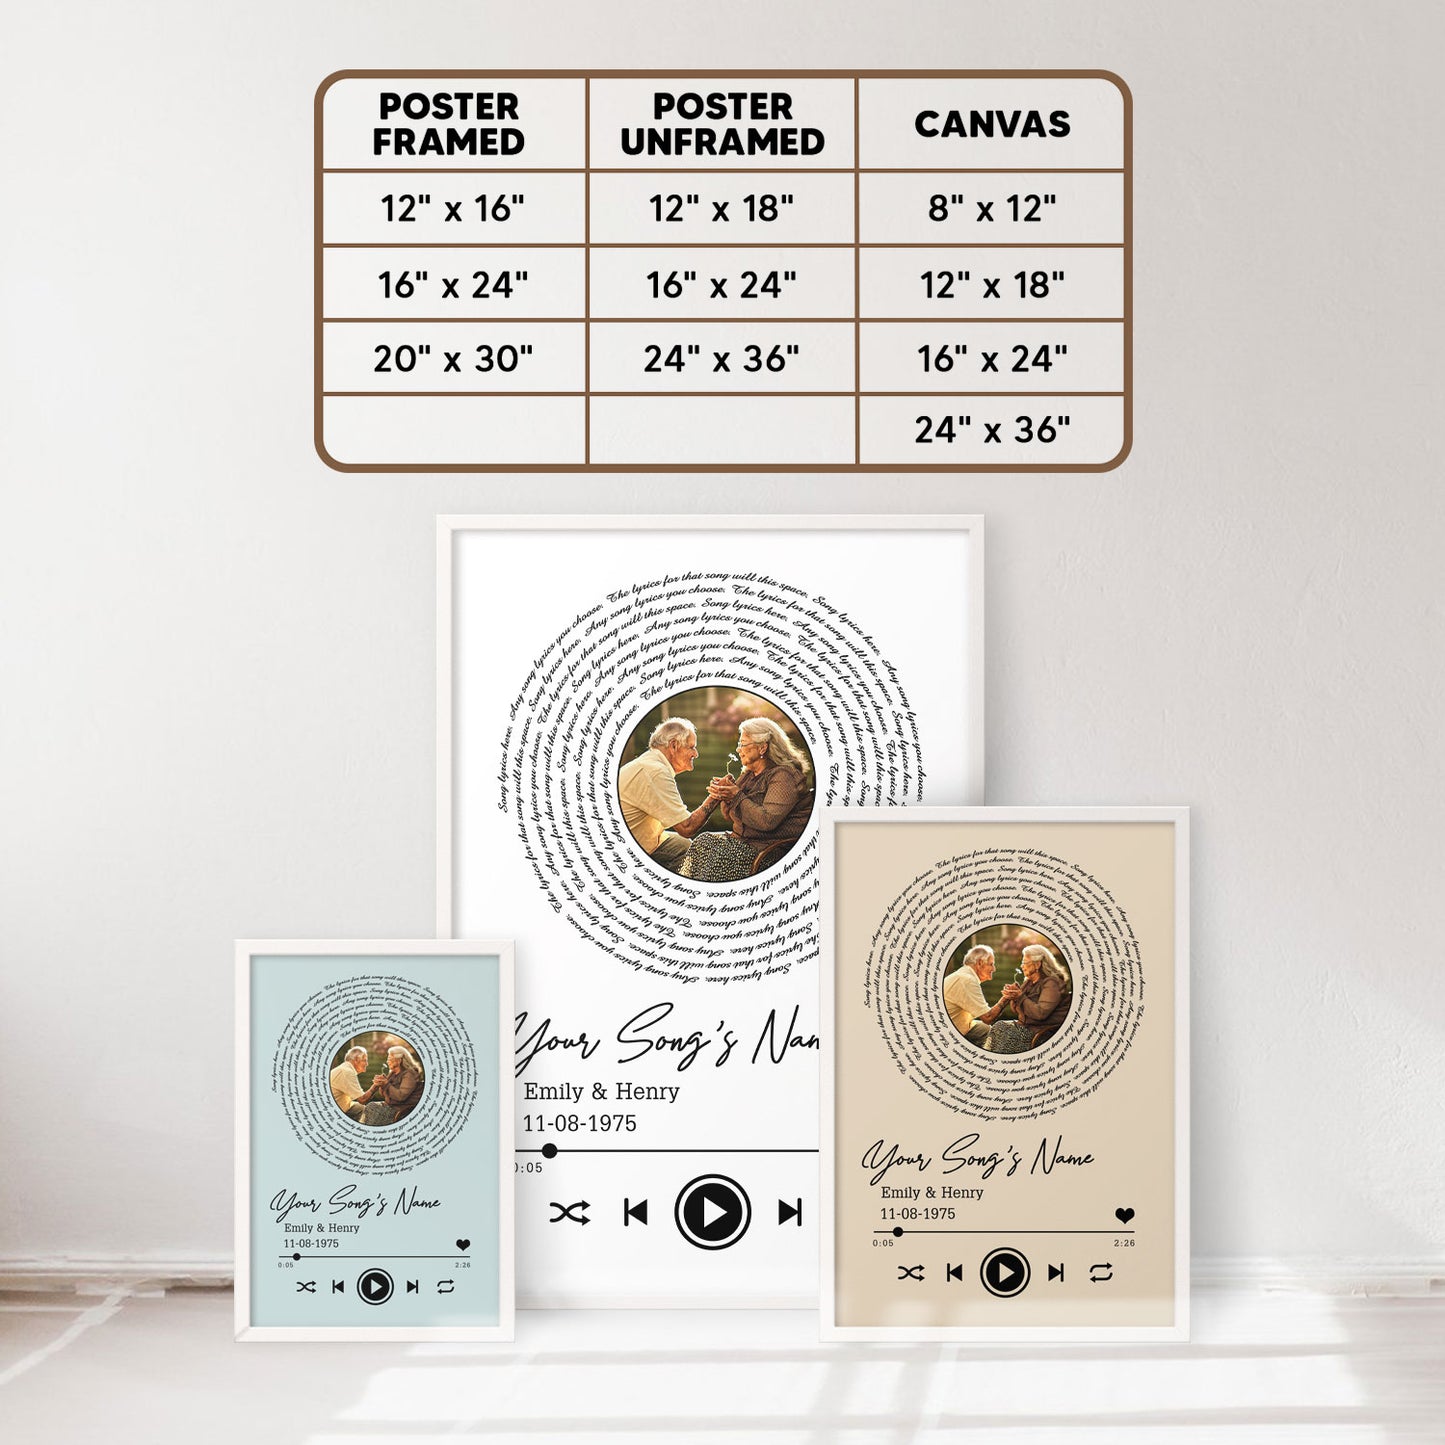 Personalized Song Lyrics Record Anniversary Customized Photo Poster